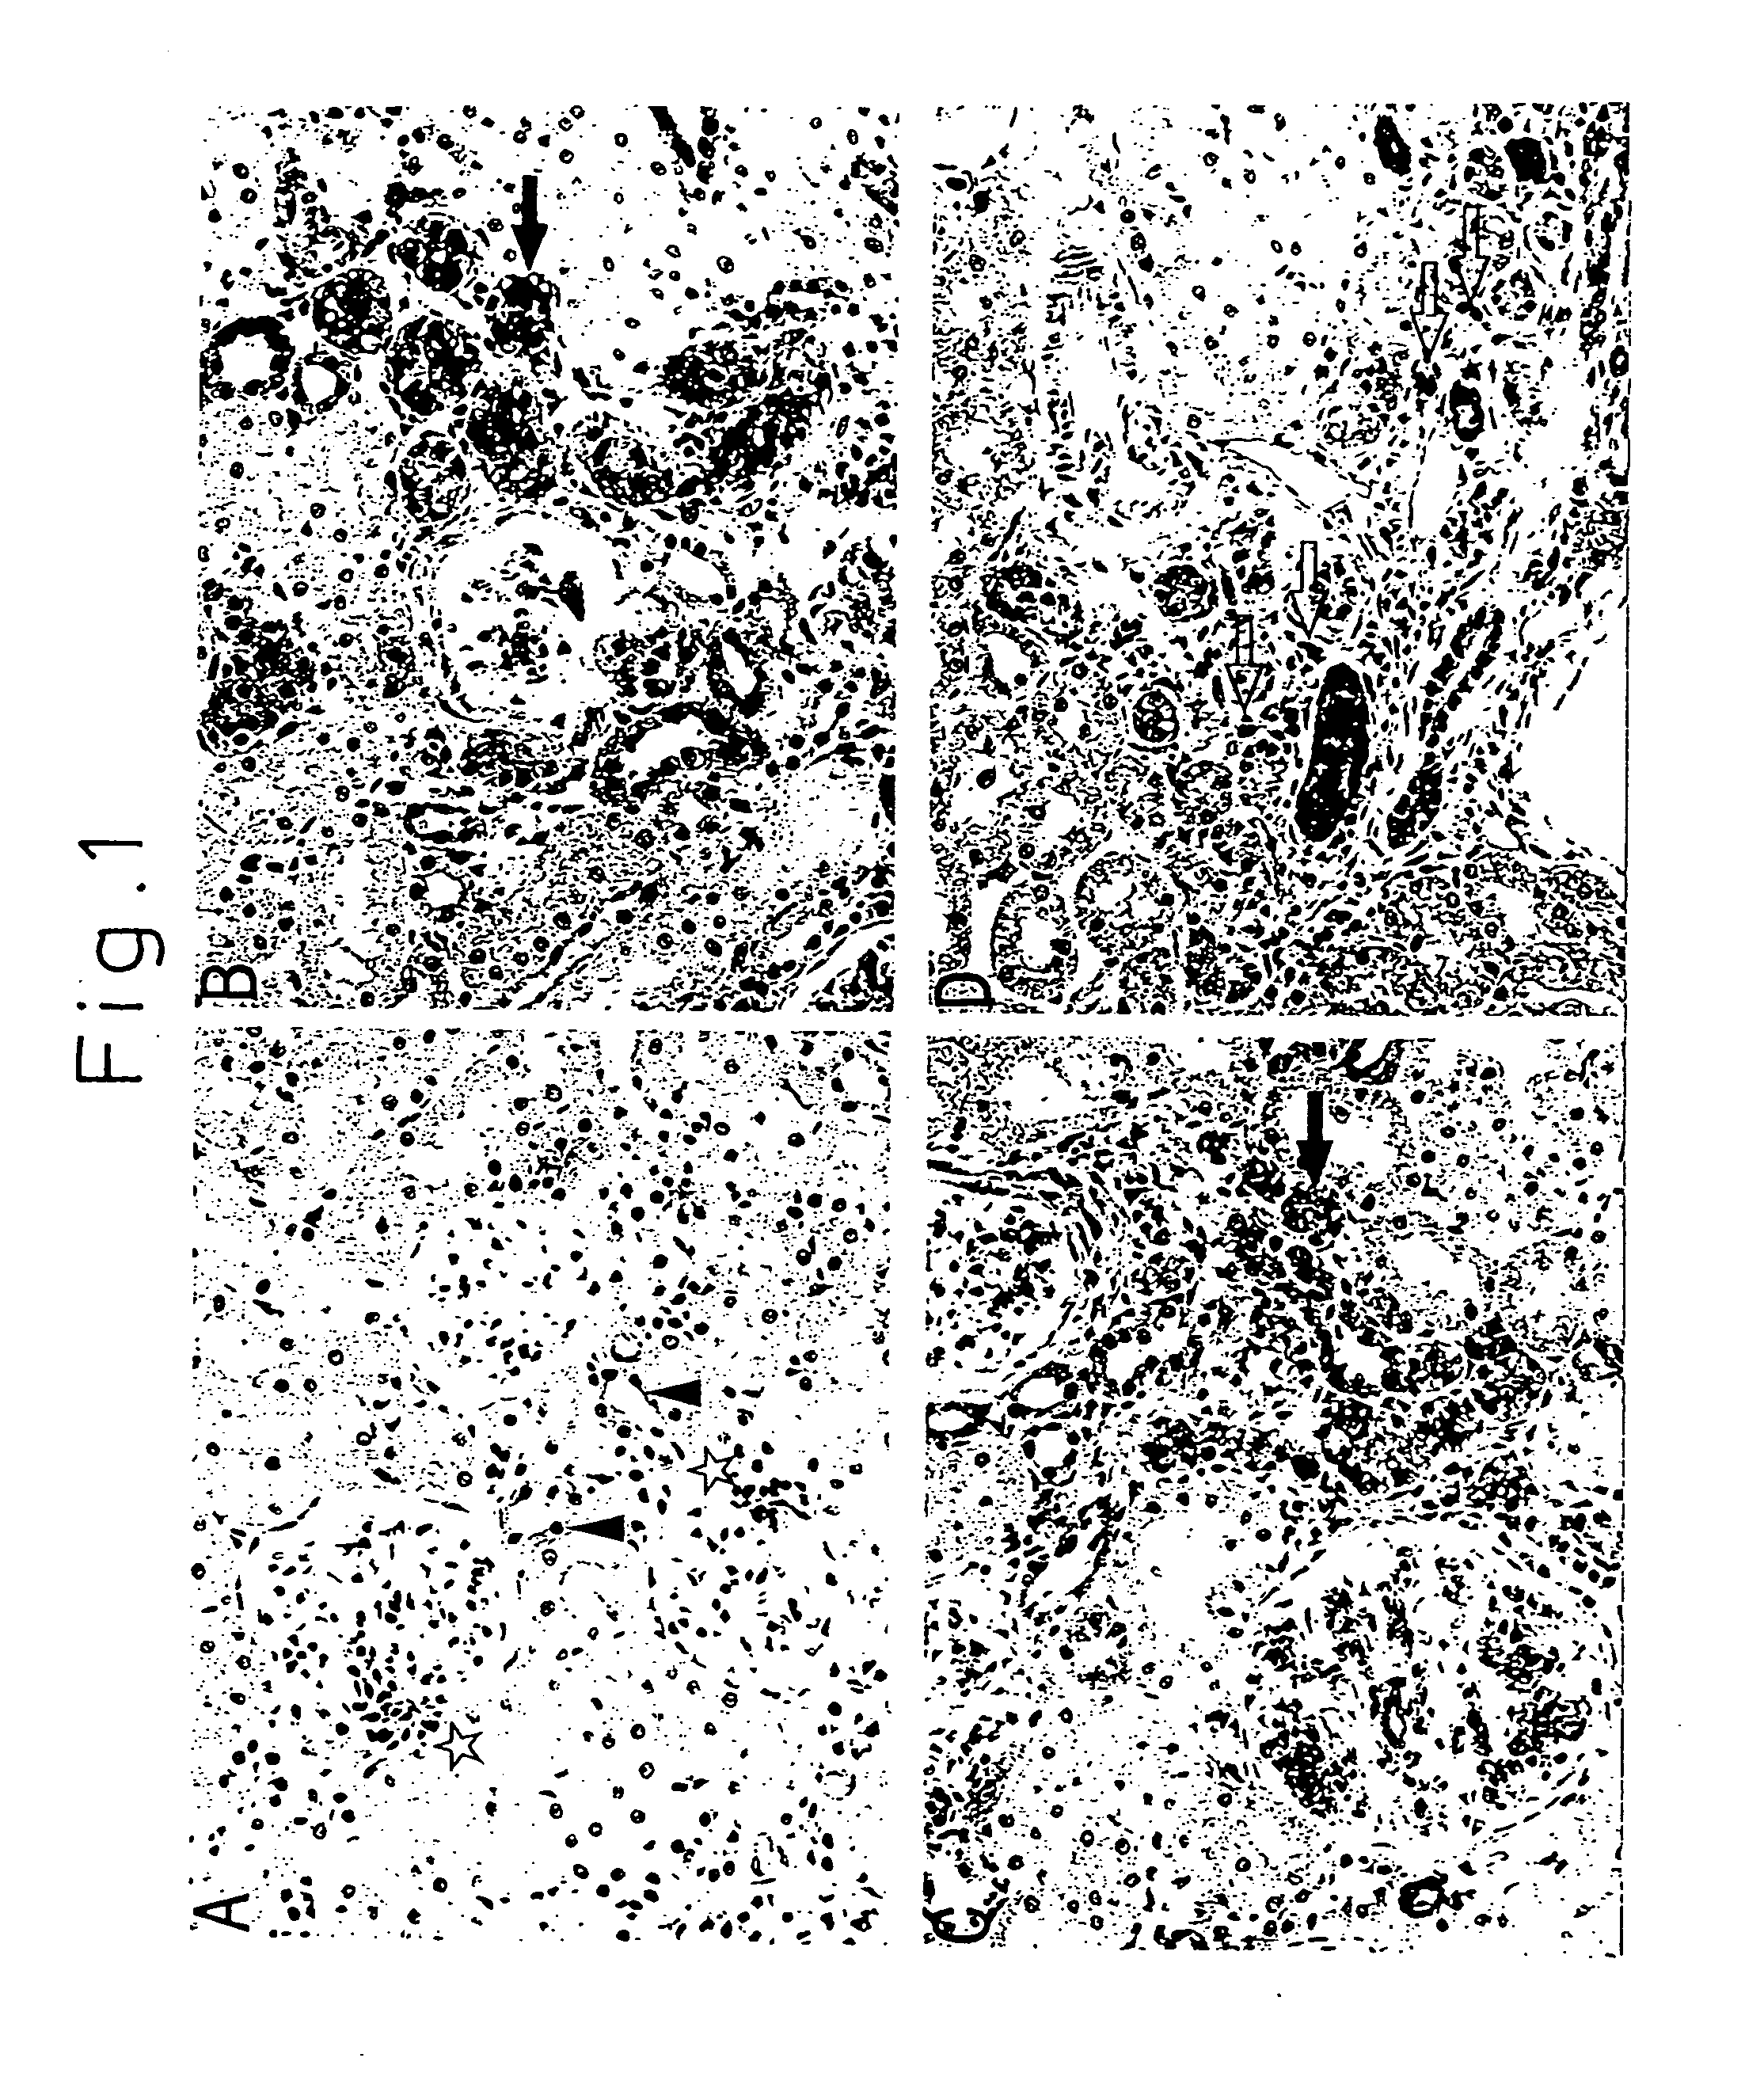 Pharmaceutical composition having inhibitory effect on overproduction and accumulation of extracellular matrix